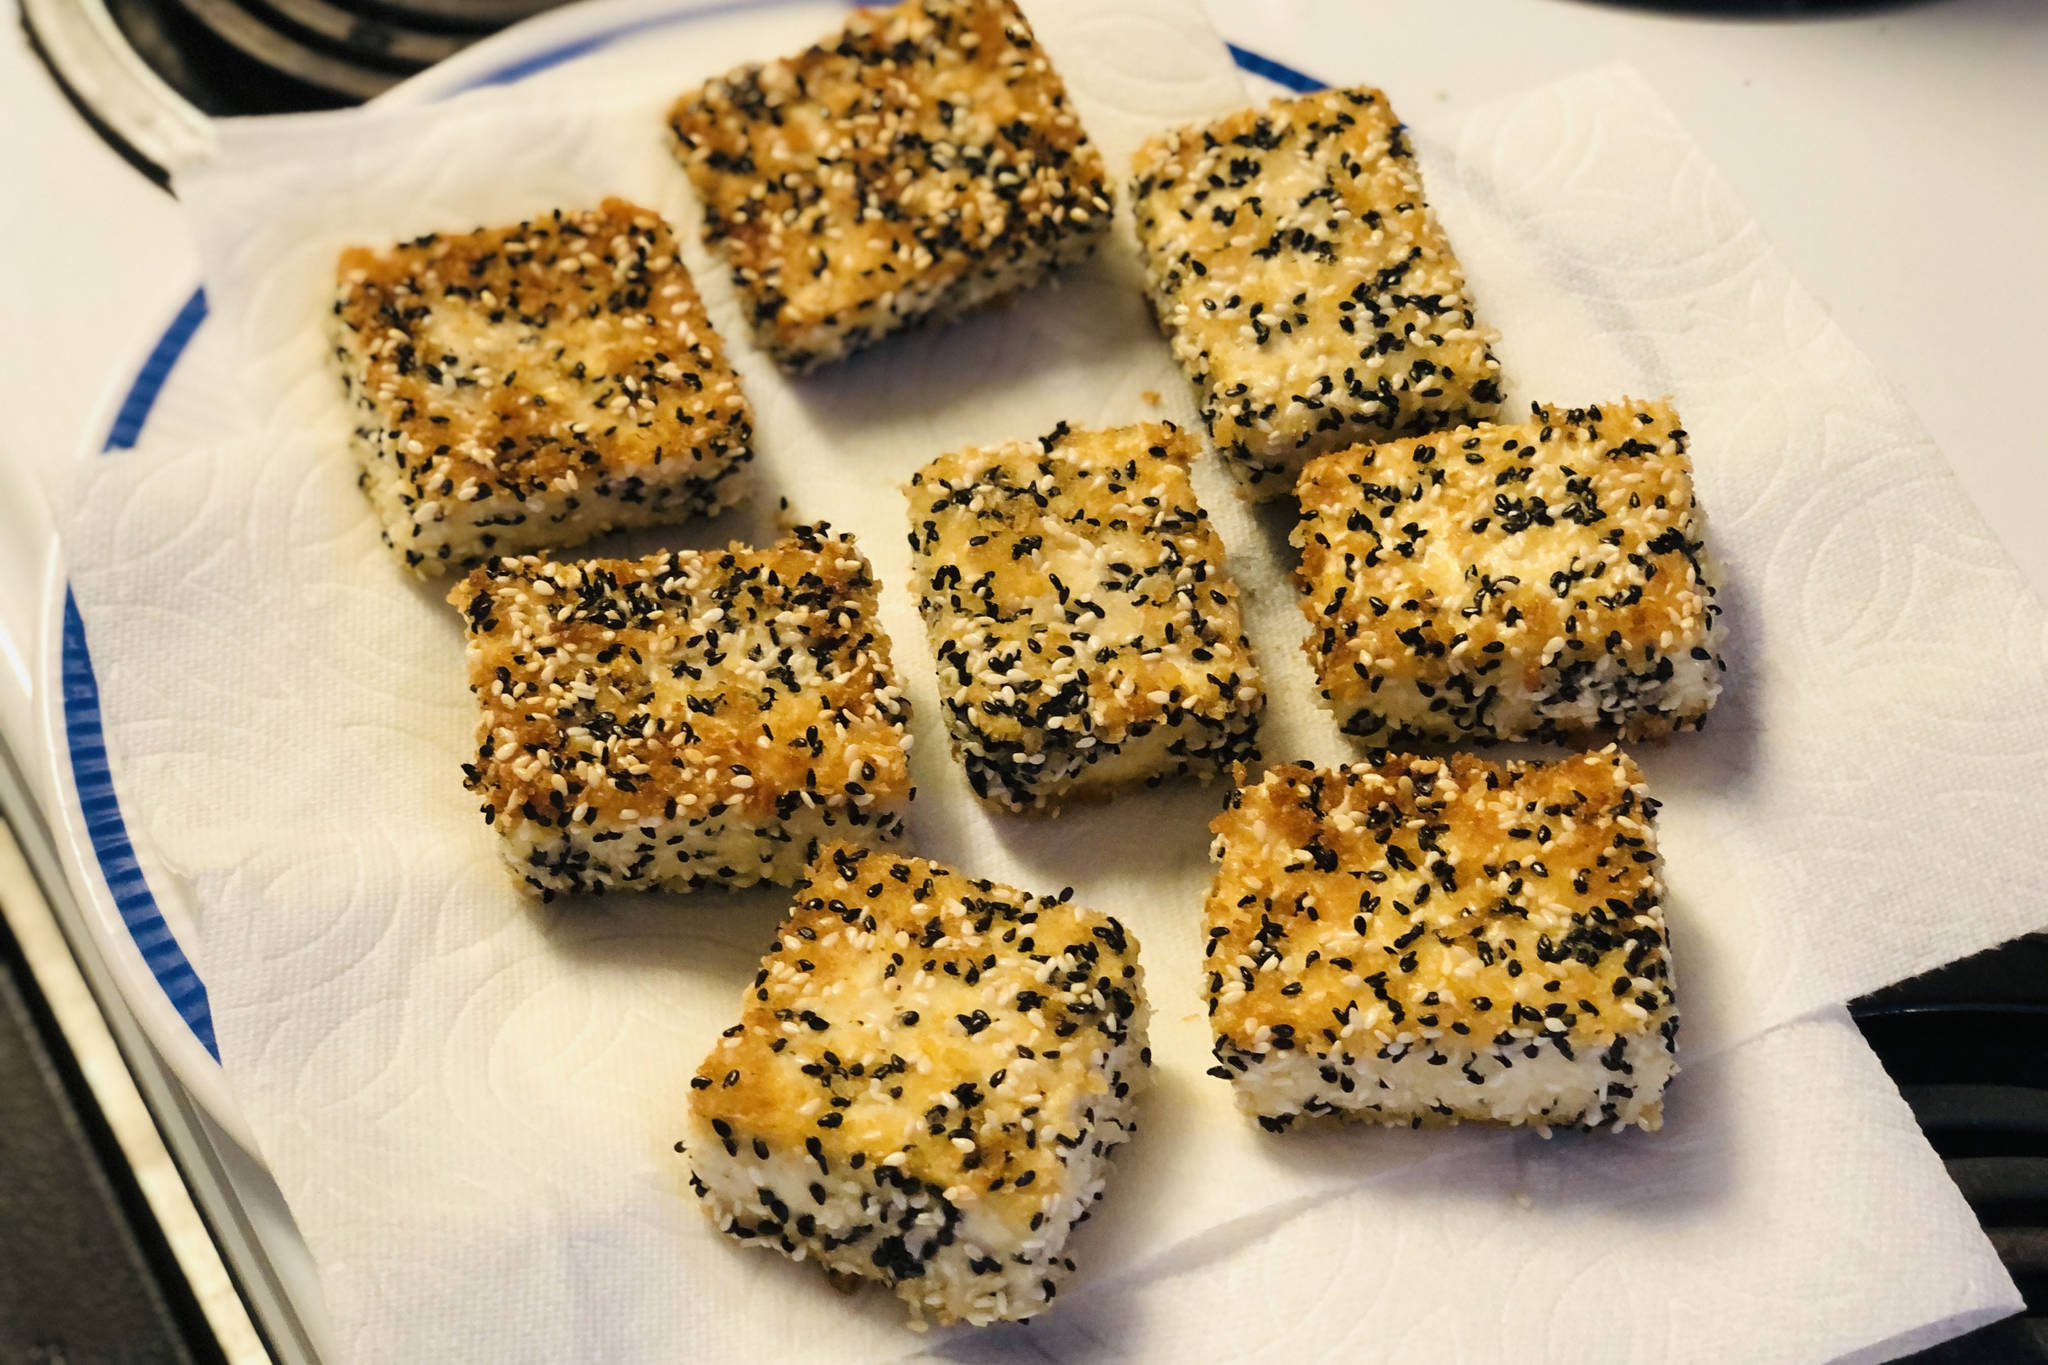 Crunchy, panko and sesame seed coated tofu make for an easy meal, photographed on Saturday, March 27, 2021, in Anchorage, Alaska. (Photo by Victoria Petersen/Peninsula Clarion)